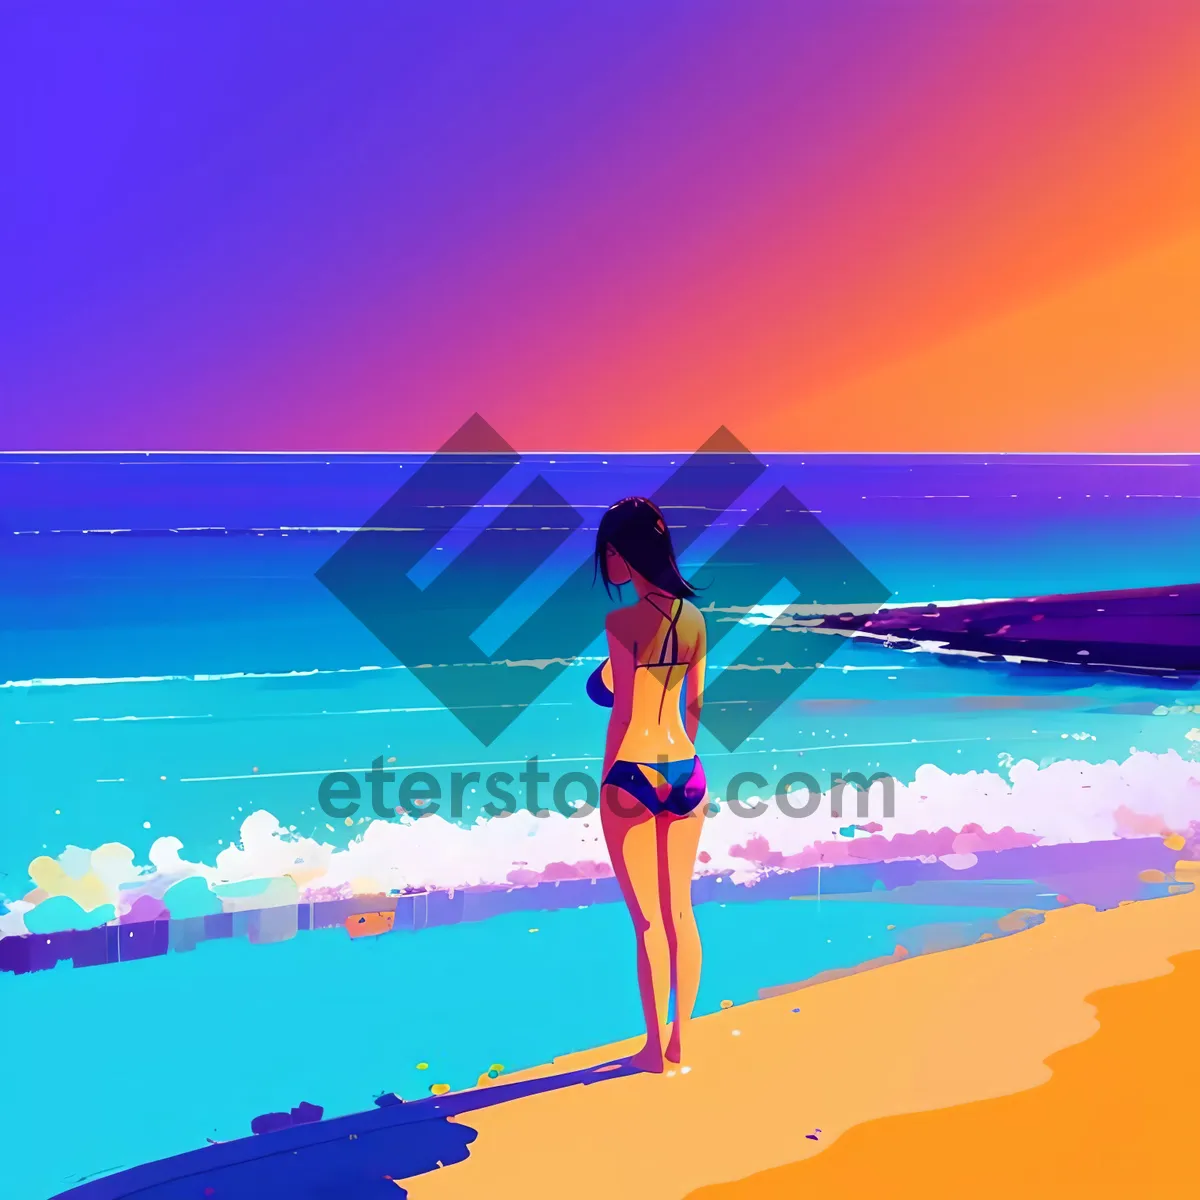 Picture of Sun-kissed Surfer Enjoying Tropical Beach Vibes